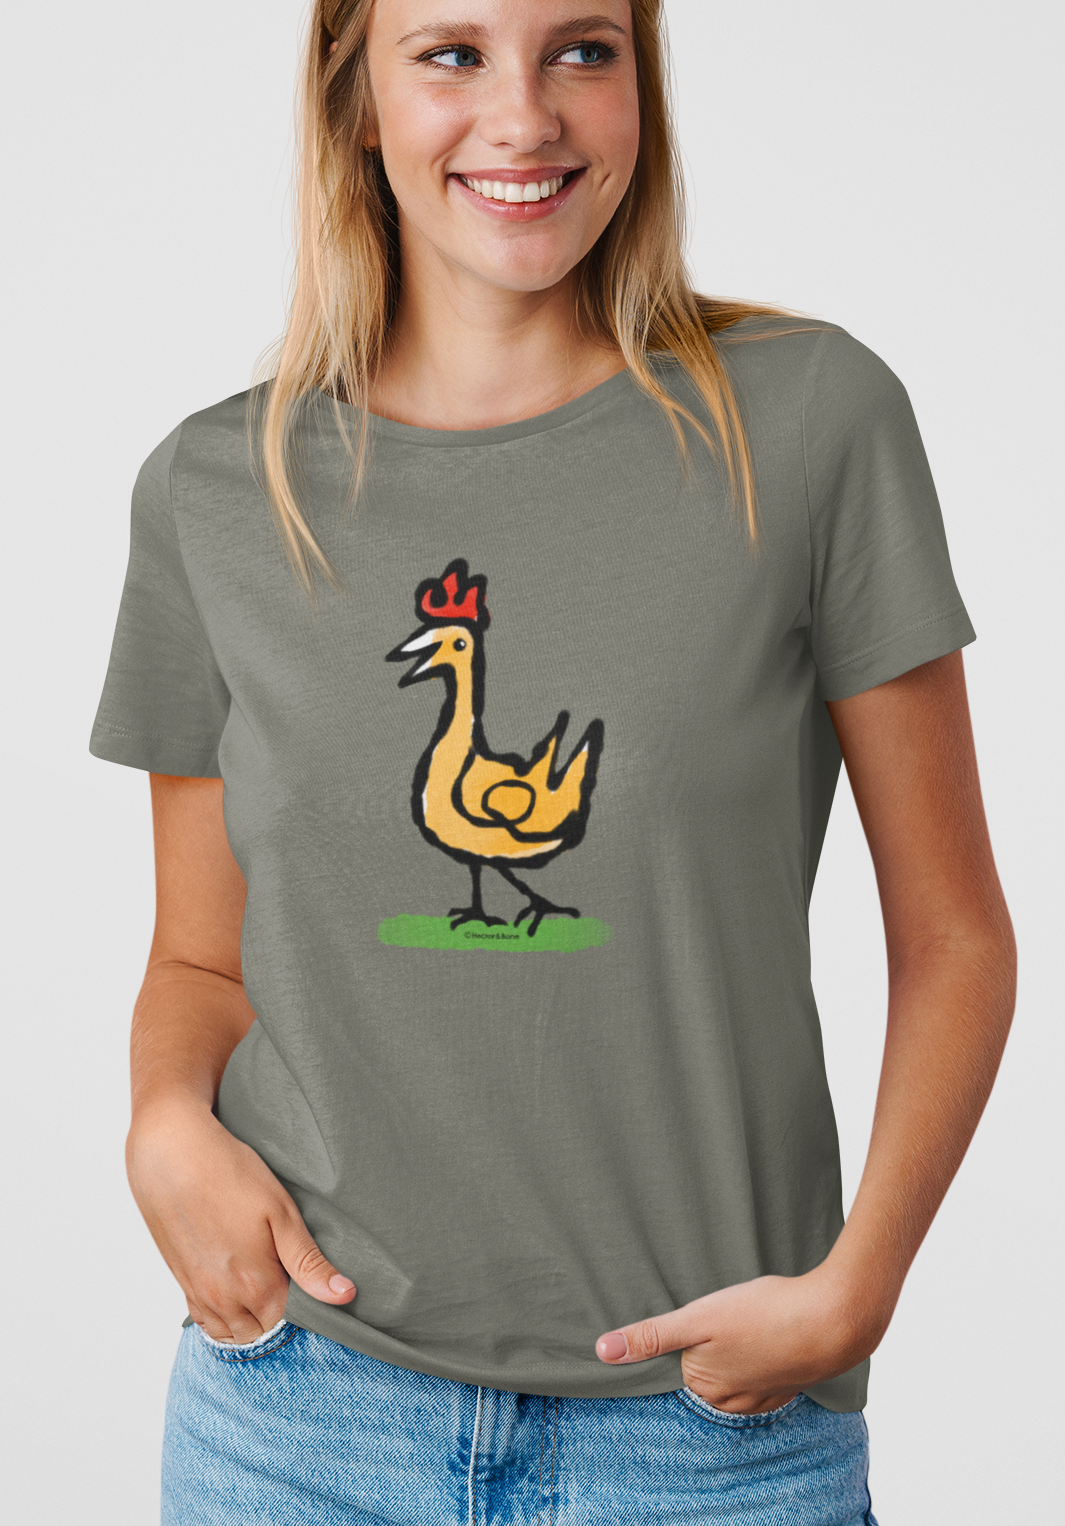 Happy Chicken T-shirt - Smiling young woman wearing Illustrated Funny Chicken design on khaki colour vegan cotton t-shirts by Hector and Bone